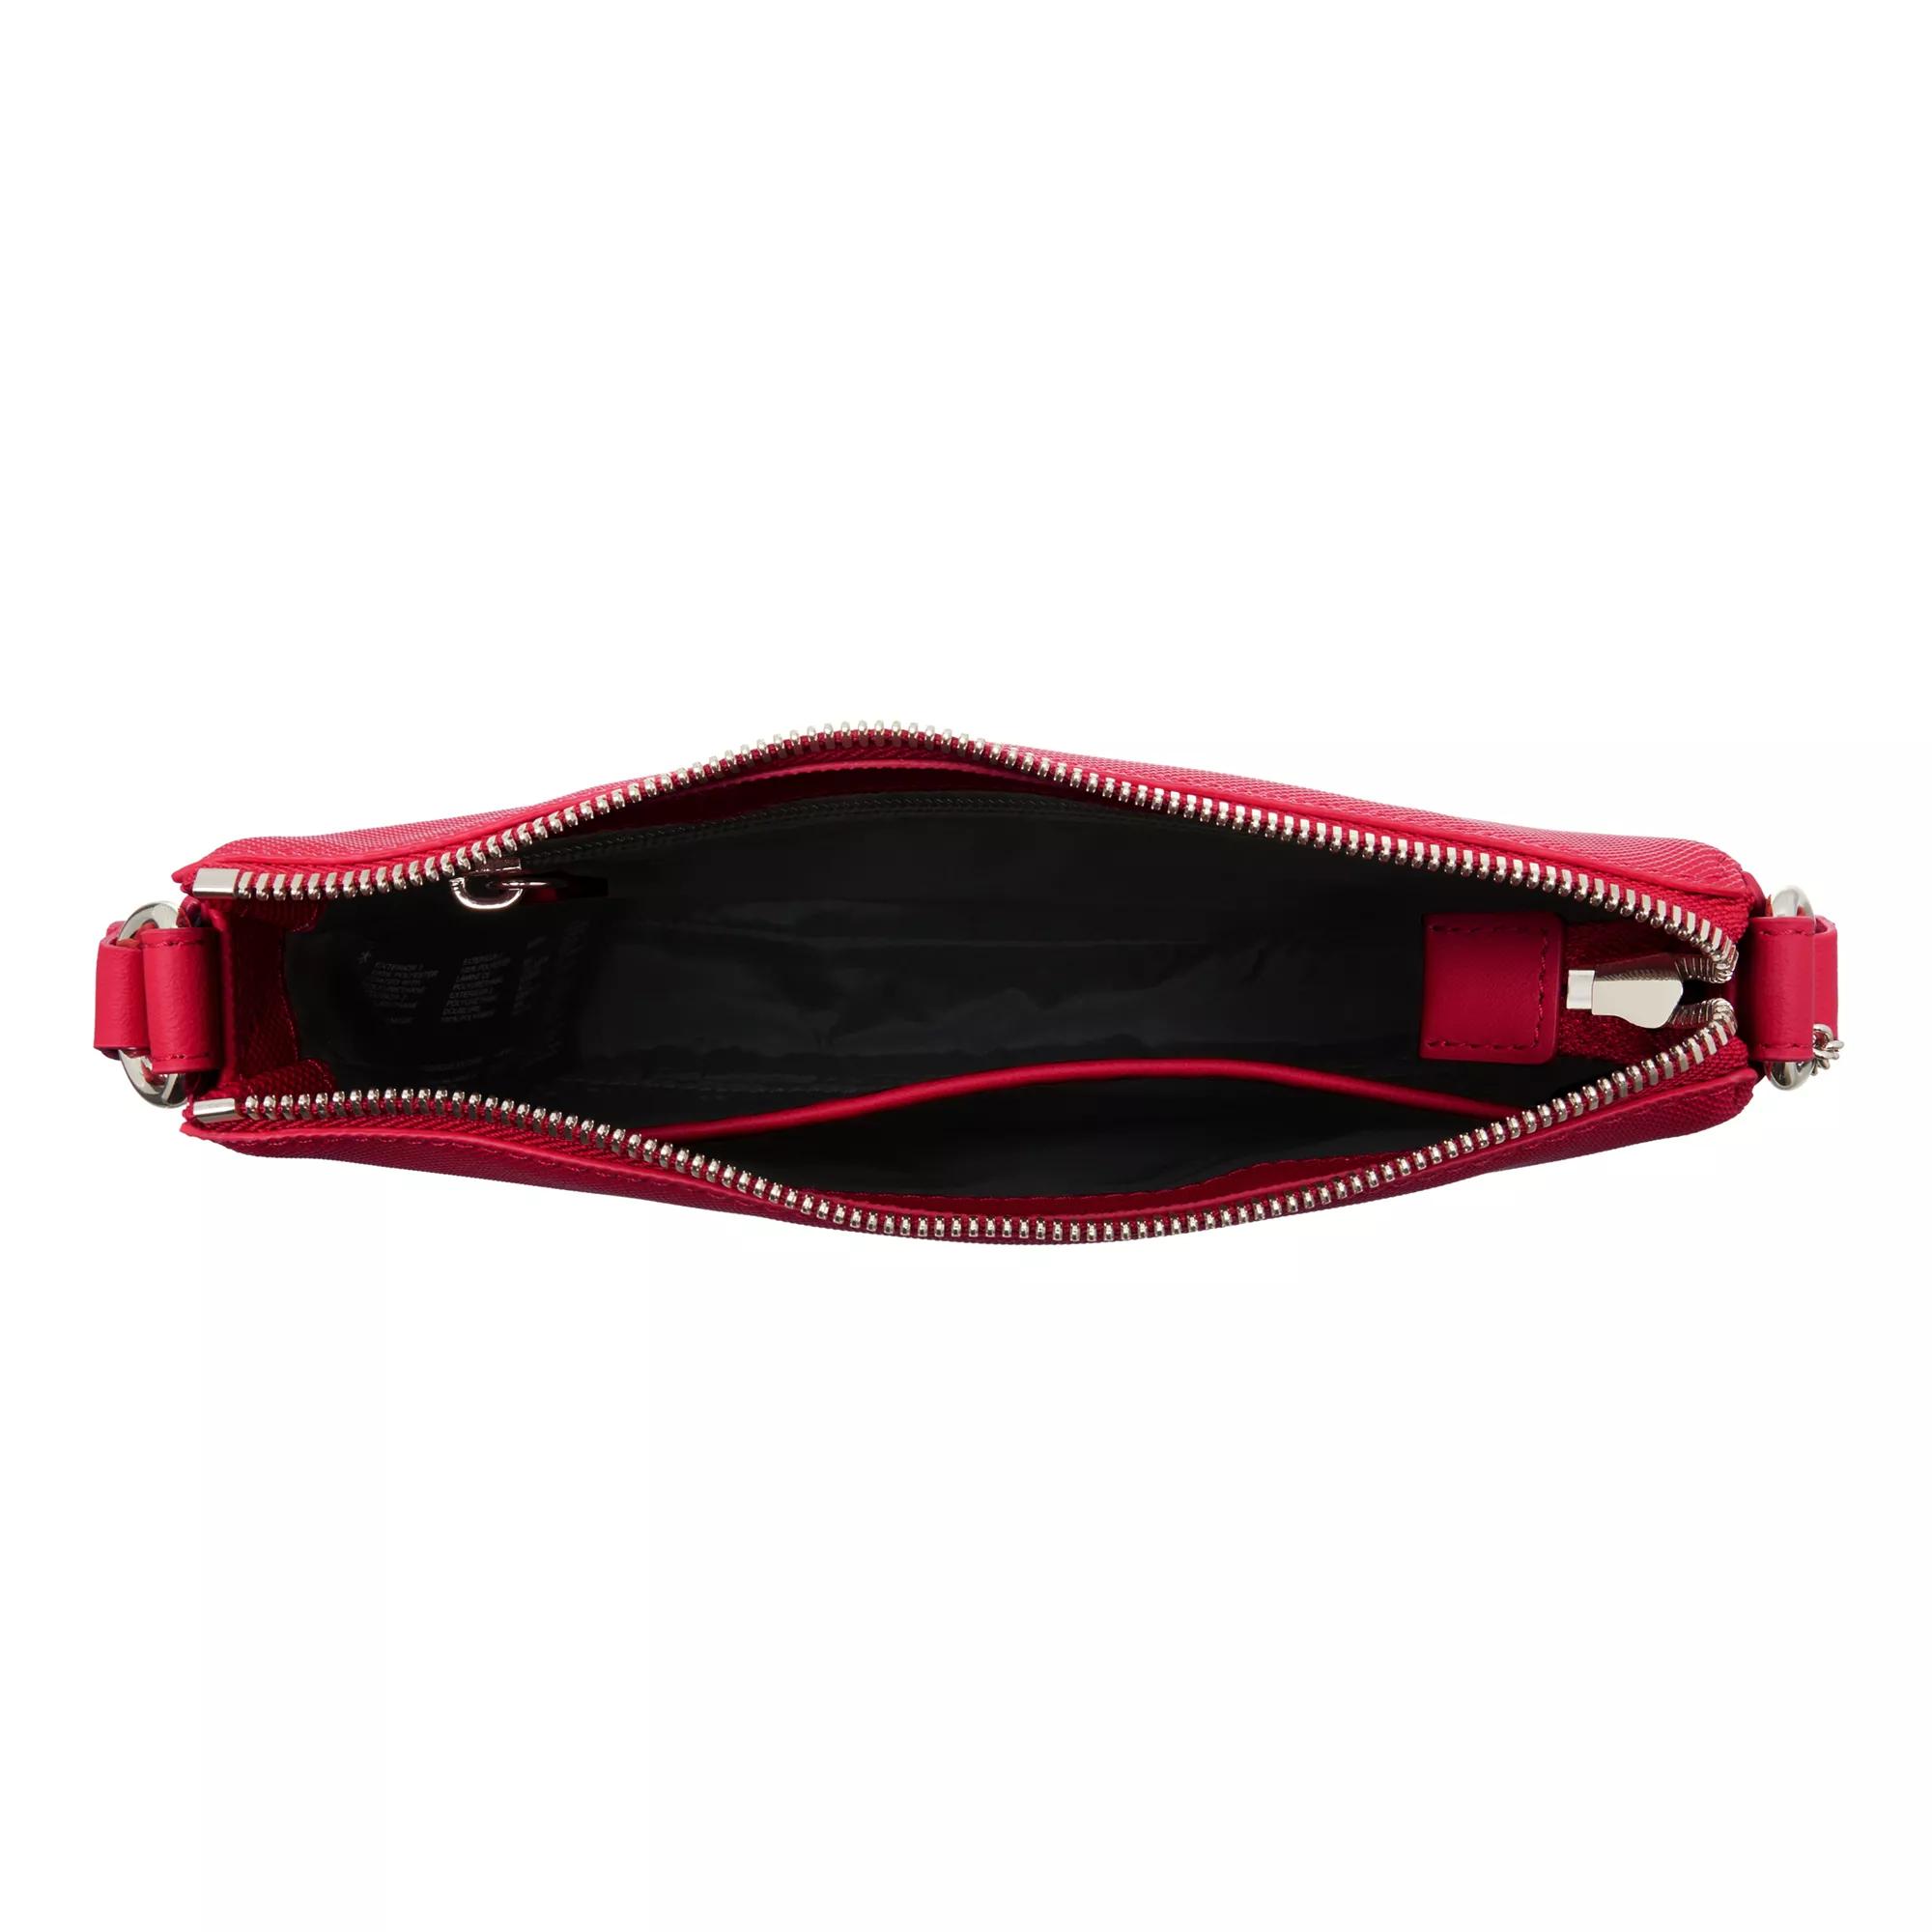 Lacoste Crossbody bags Crossover Bag in rood